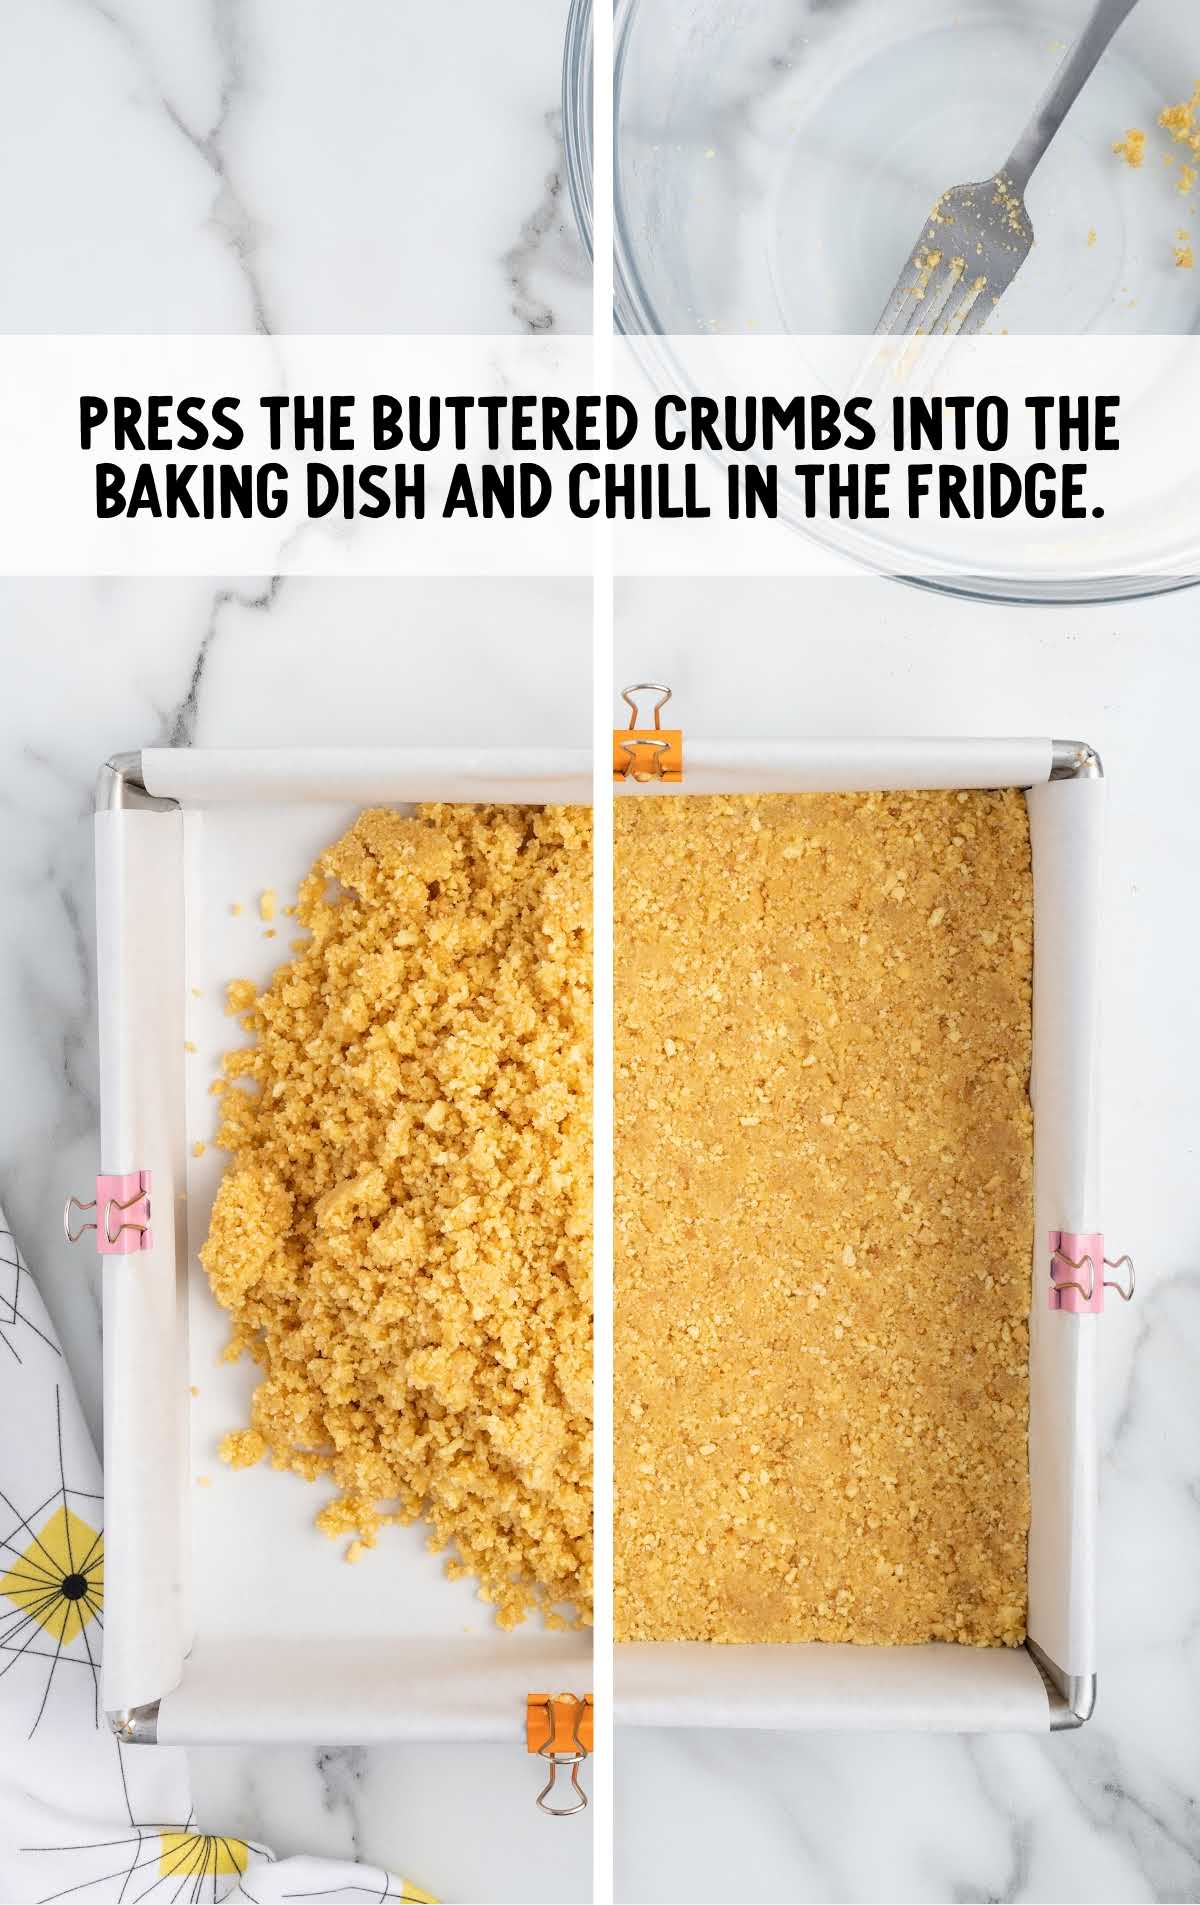 buttered crumbs pressed into the baking dished